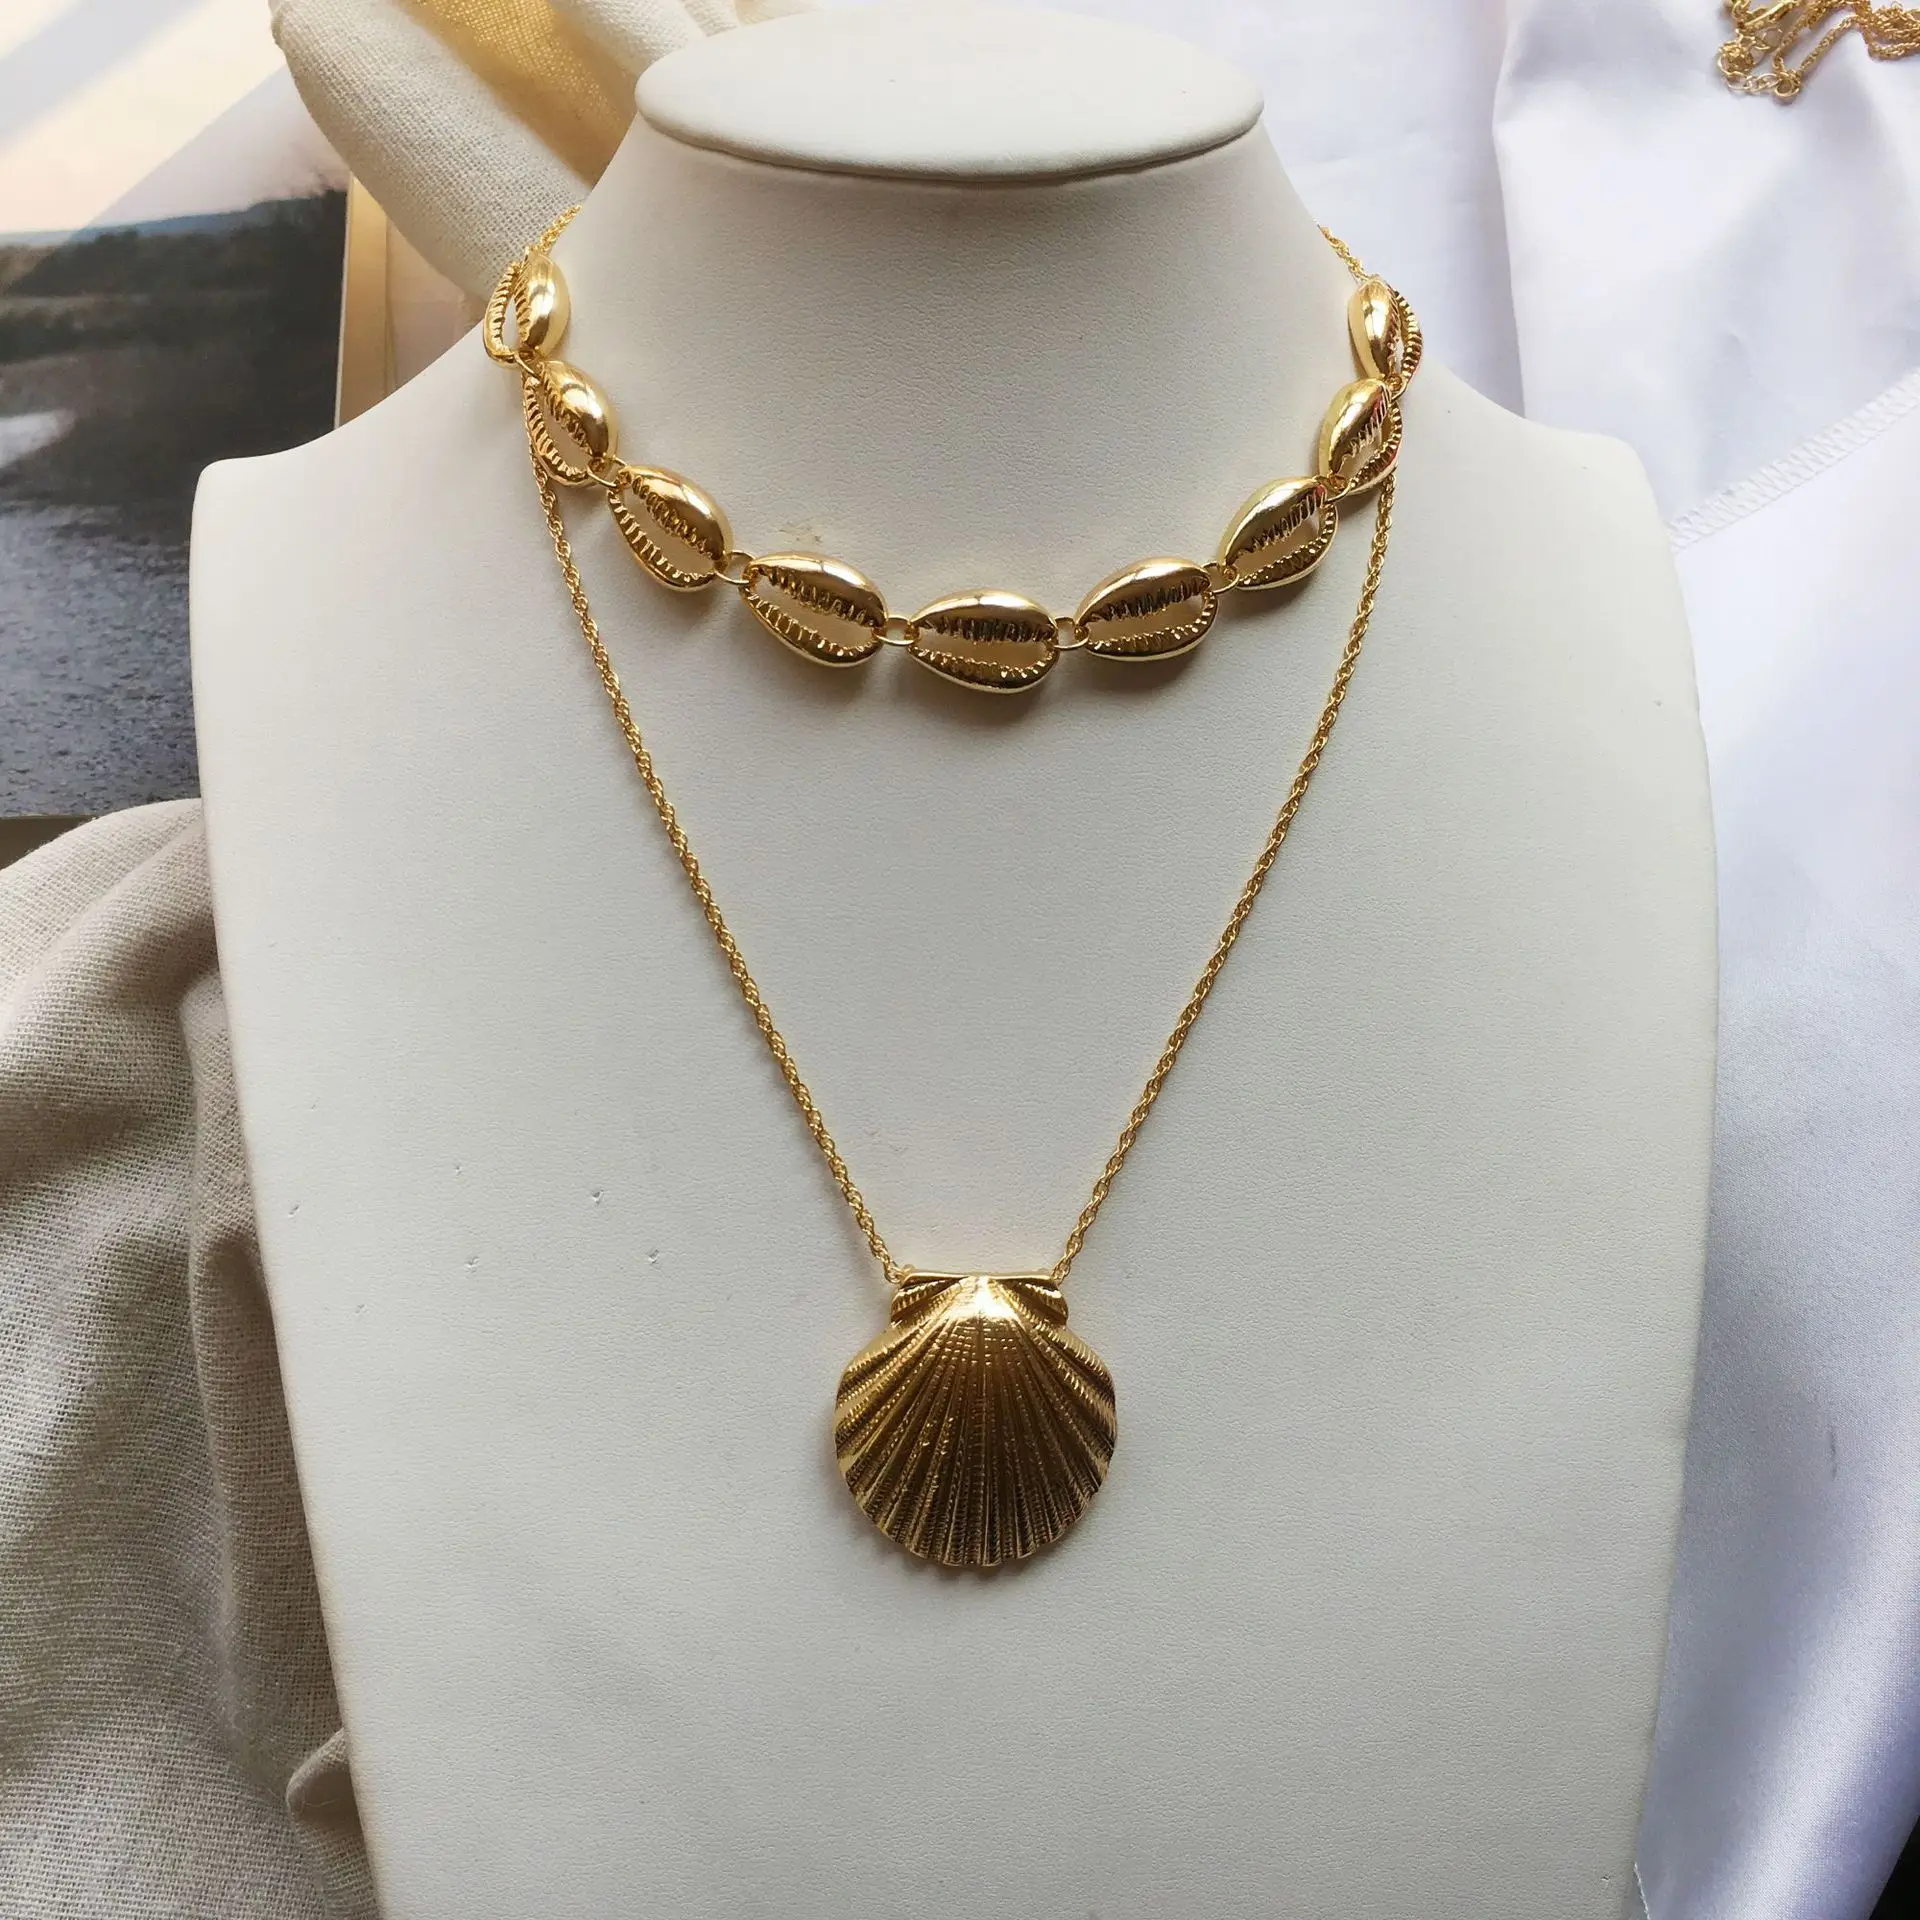 Luxury Big Cowrie Shell Pendant Necklace for Women Gold Color Short ...